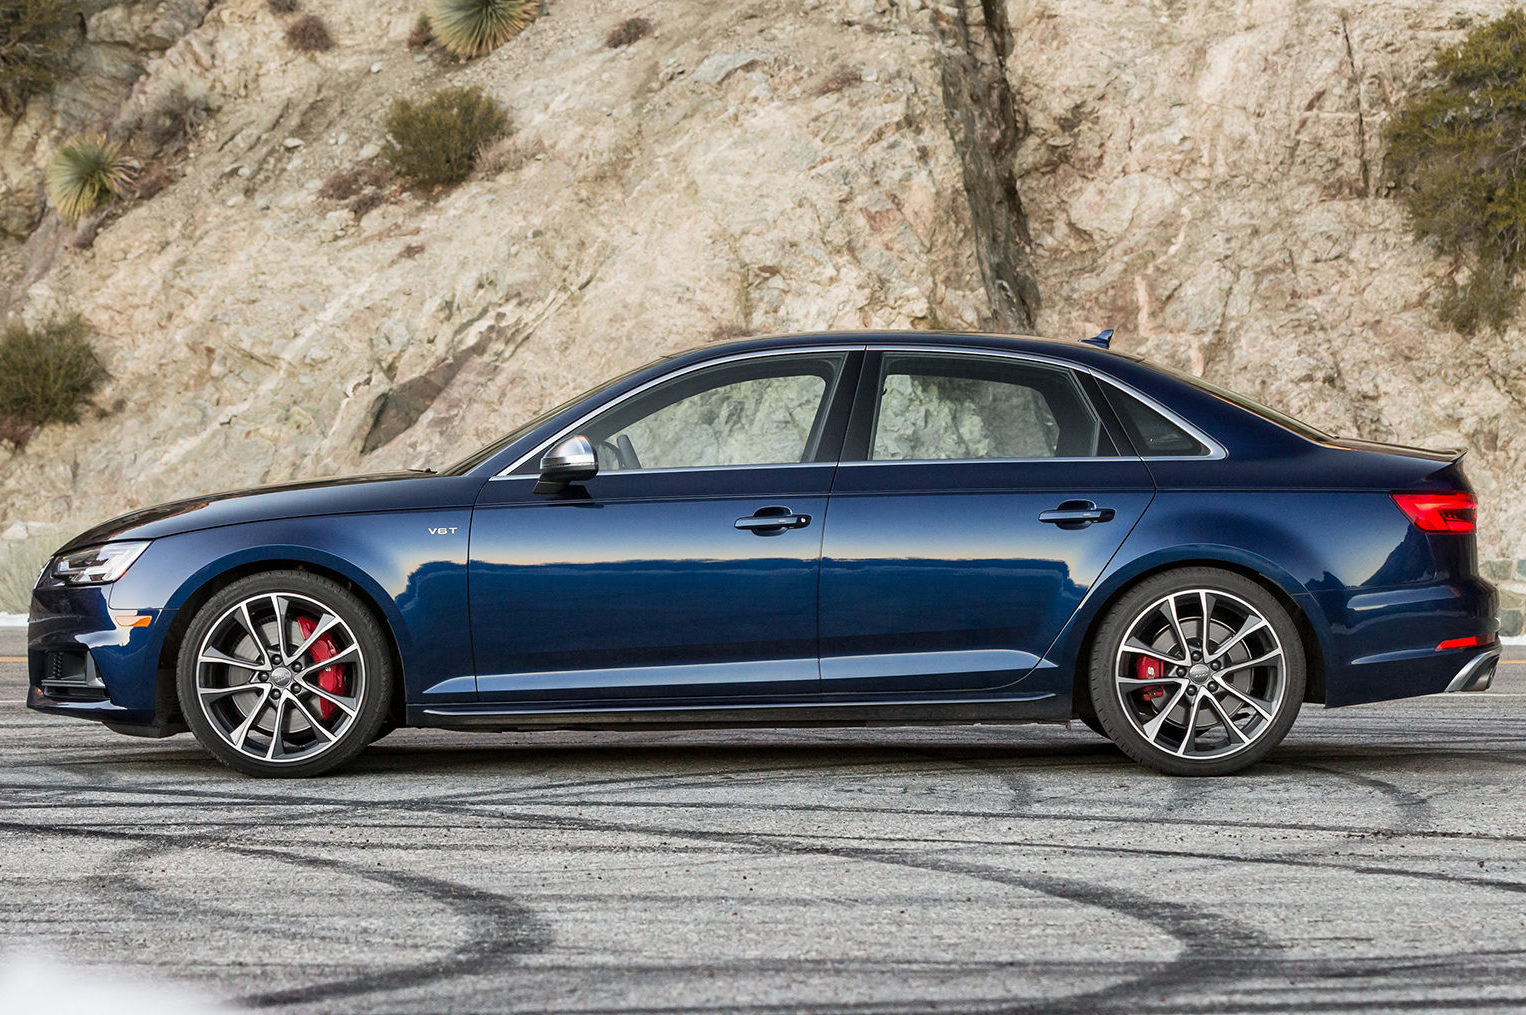 2018 Audi S4 First Test: So Quick! But…